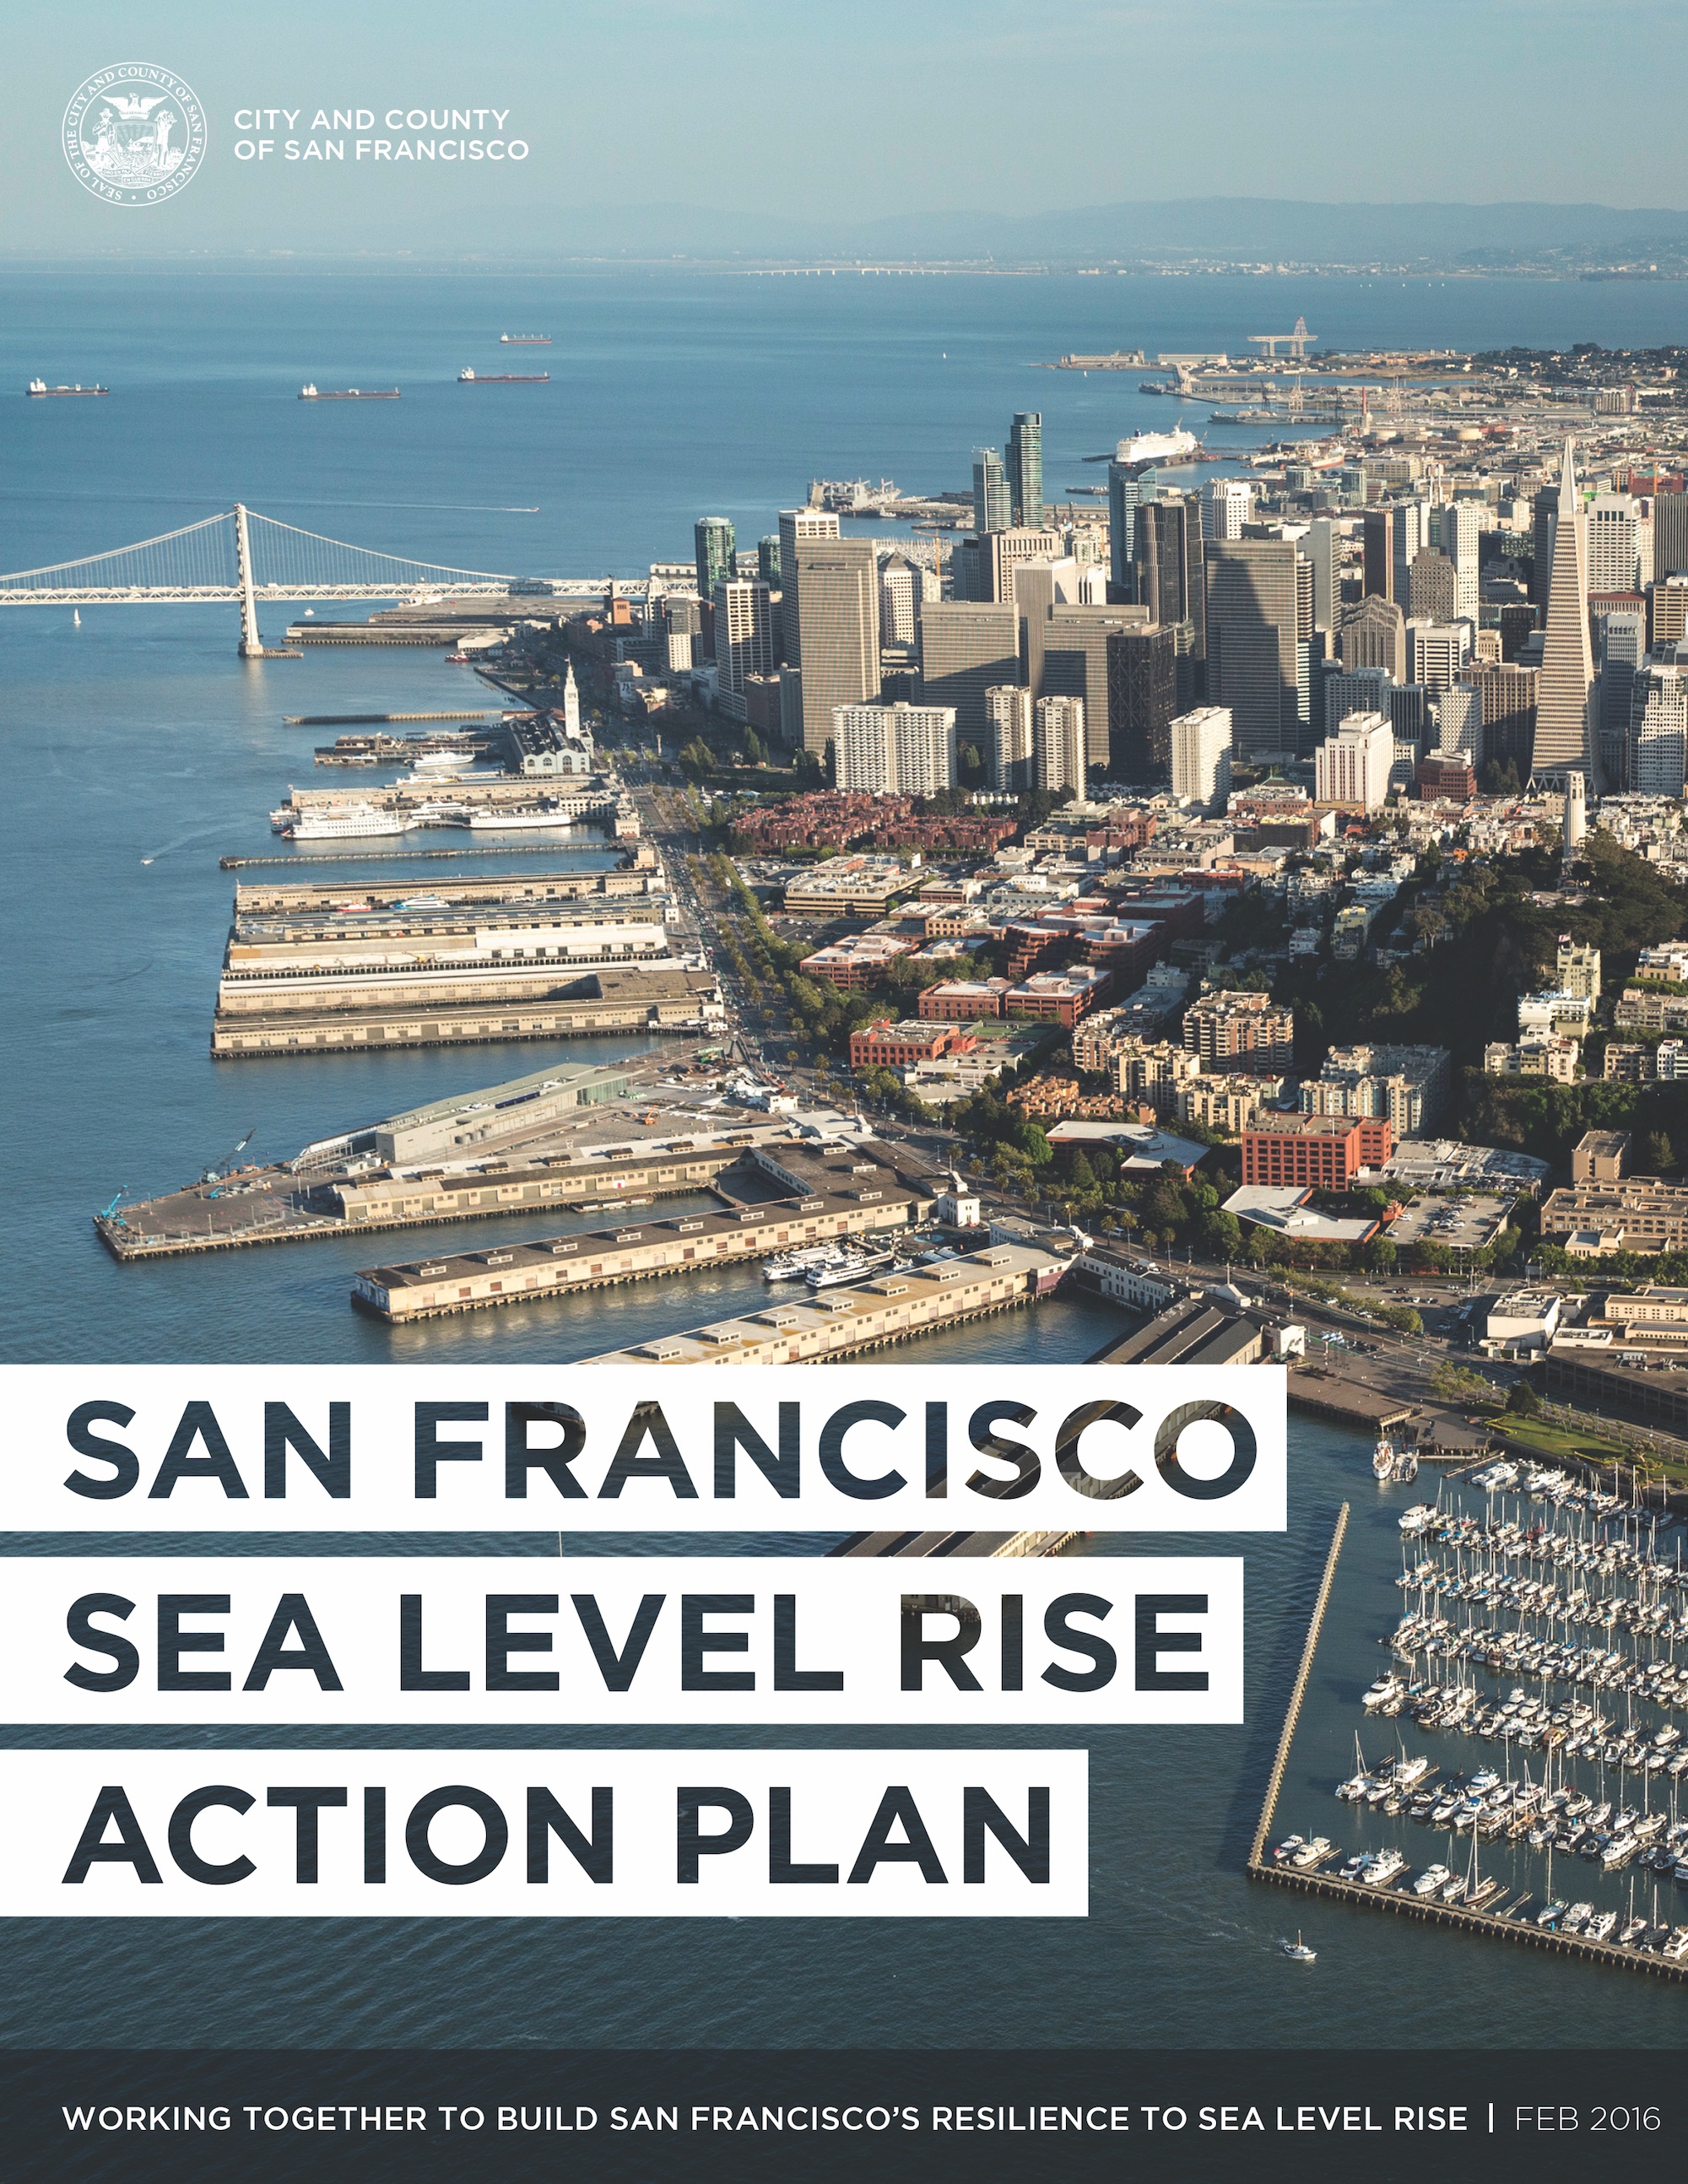 The Recently Published Sea Level Rise Action Plan